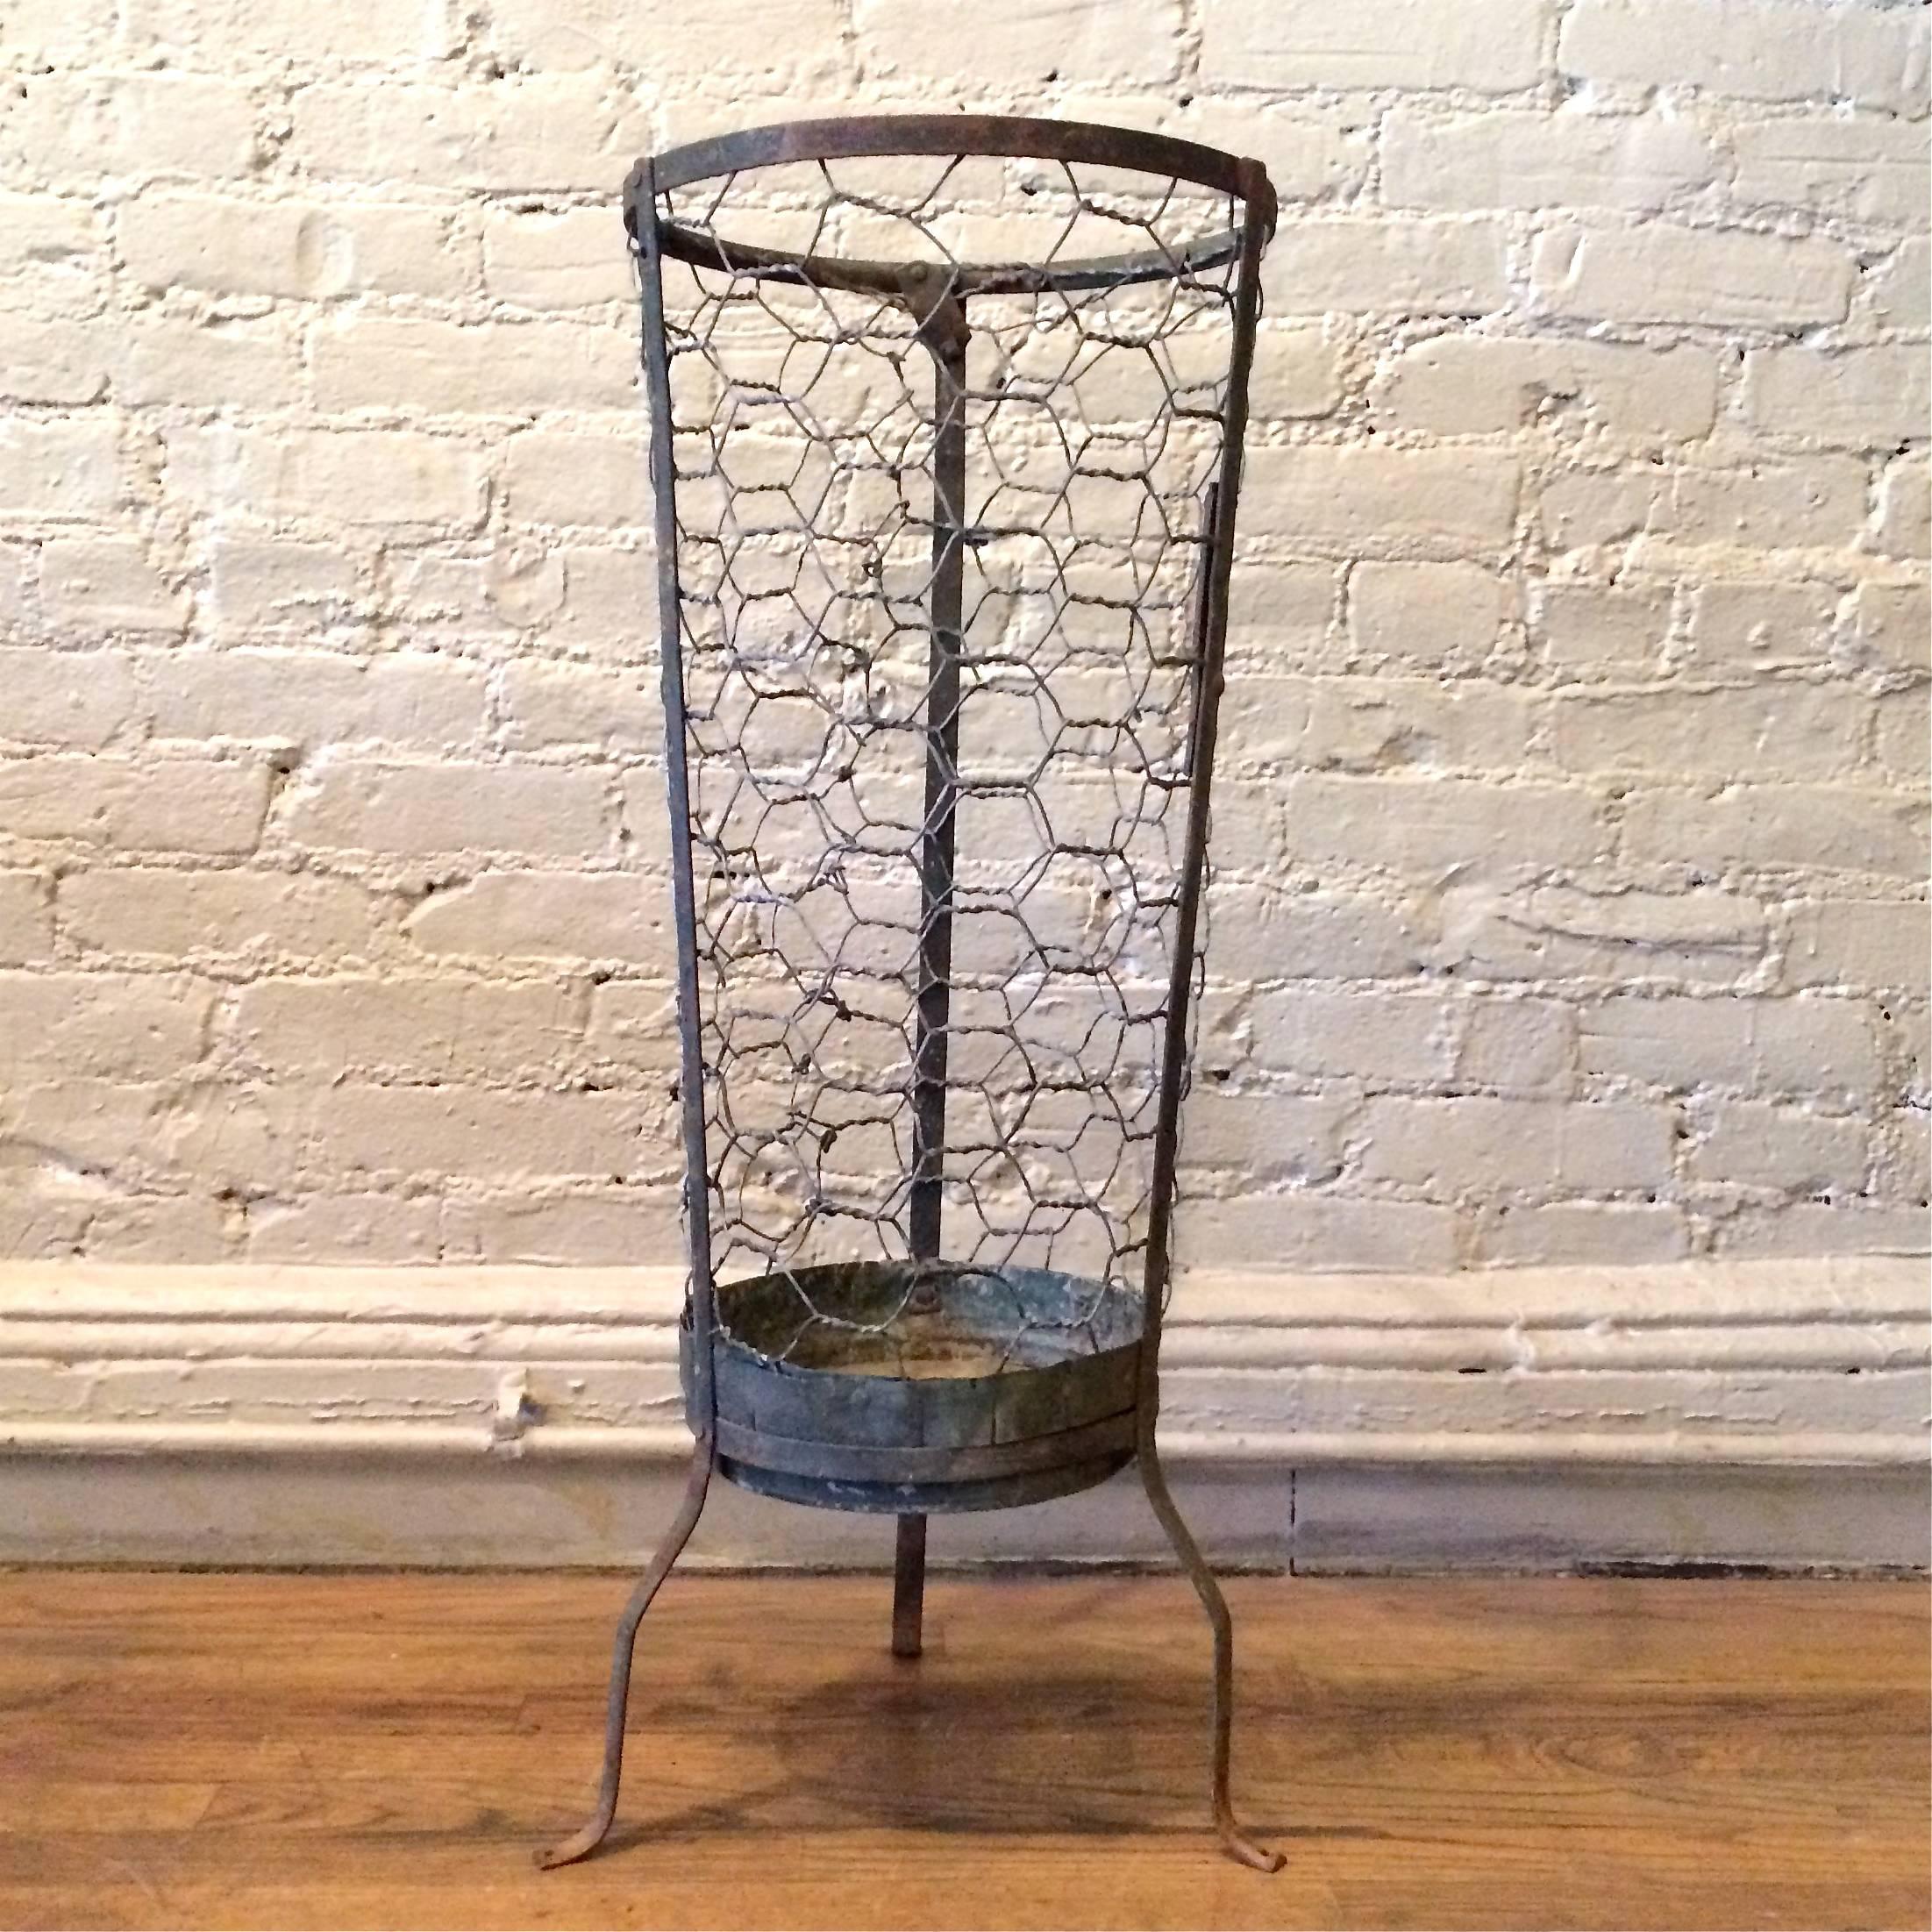 Industrial, galvanized steel, open weave, metal mesh basket with three prong base. The basket alone is 23 inches height and tapers from 9 inches at bottom to 12 inches on top. Footprint is 13 inches wide.